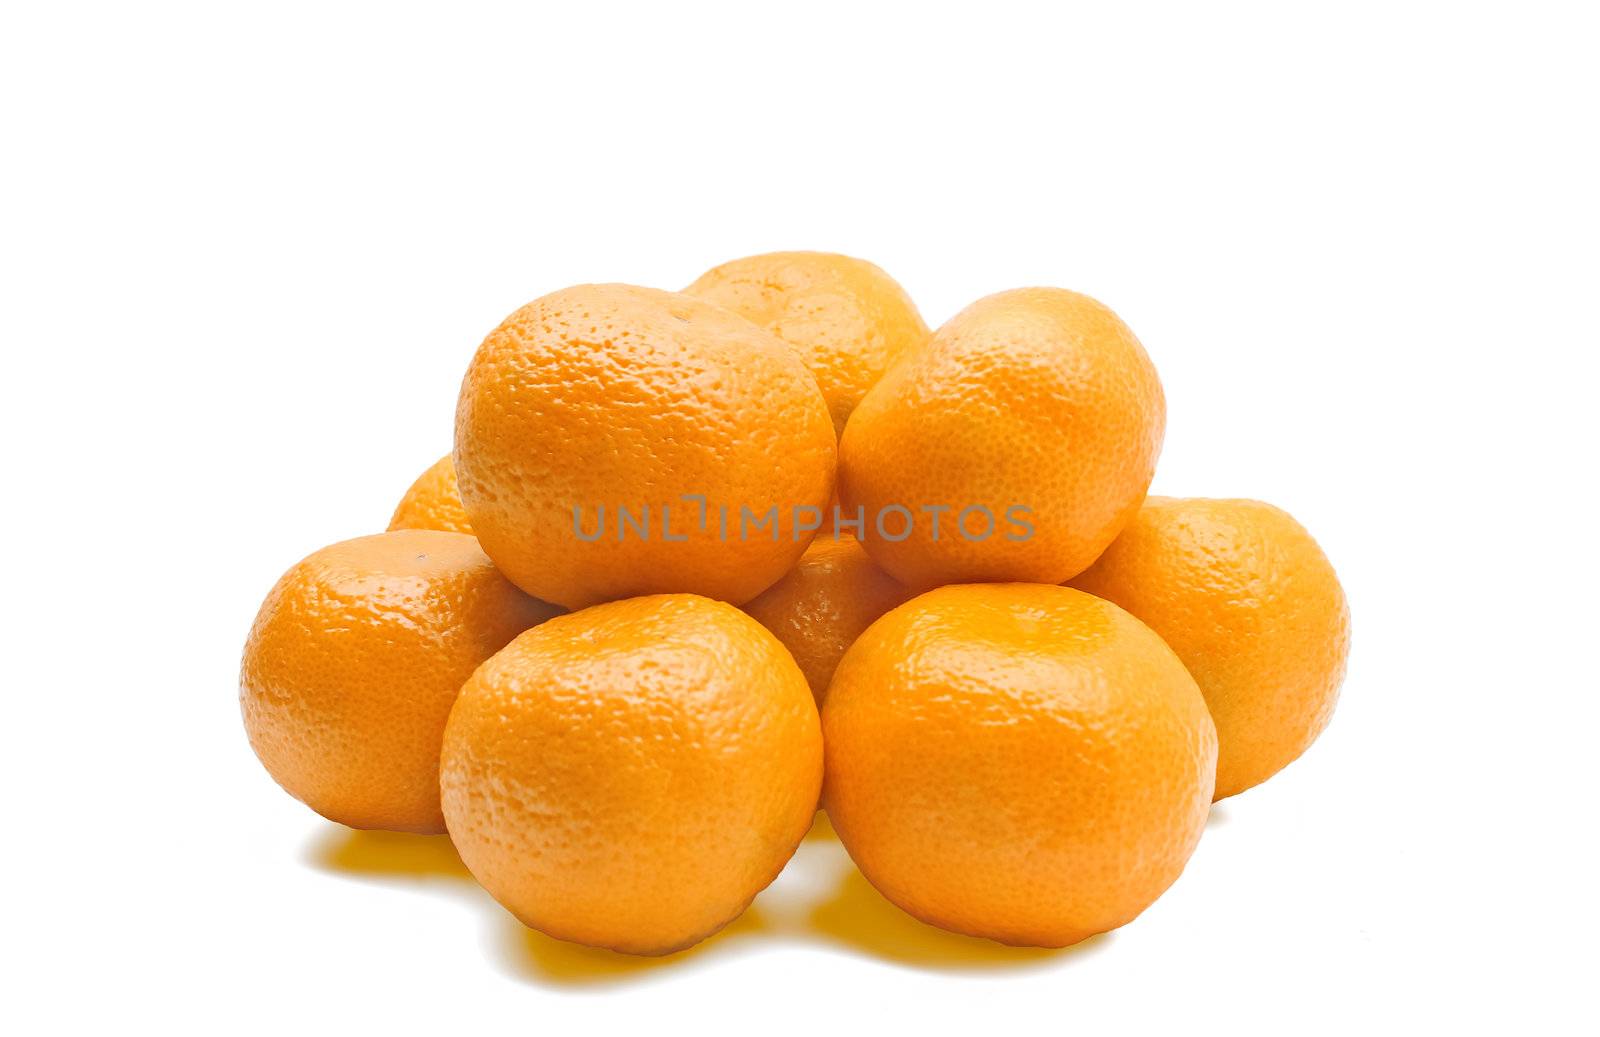 Several whole tangerine on a white background